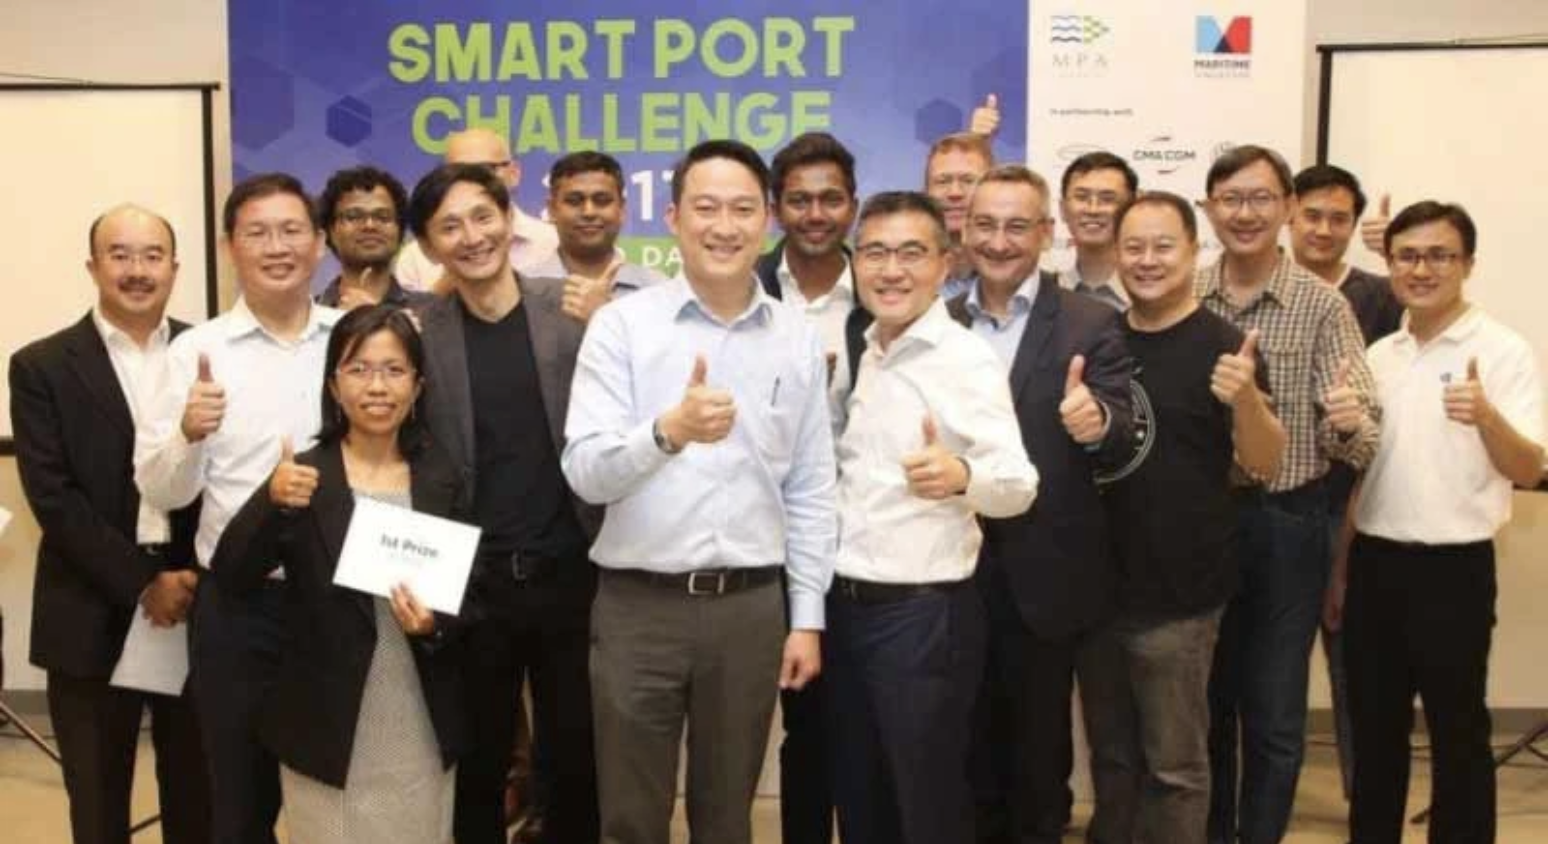 start-ups-pitch-digital-solutions-for-the-maritime-and-port-authority-of-singapore-s-smart-port